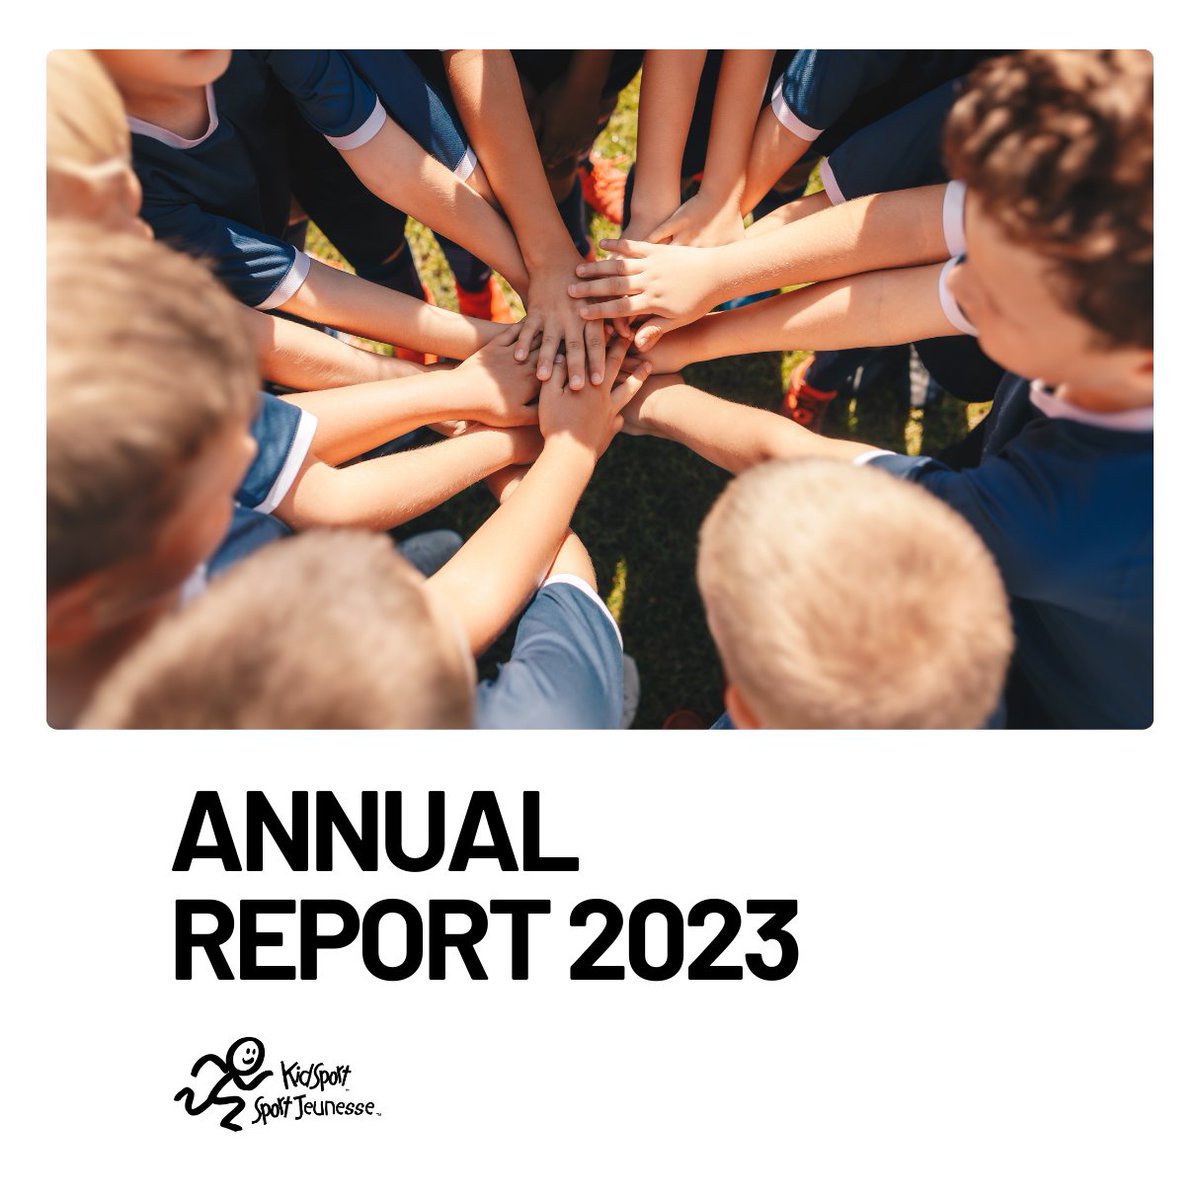 How big was 2023 for KidSport? It was record breaking! In 2023, KidSport assisted over 40K children into sport across Canada. Last year was a tremendous year for growth and impact. Read the 2023 Annual Report: ow.ly/nWBw50QXWjQ #SoALLKidsCanPlay